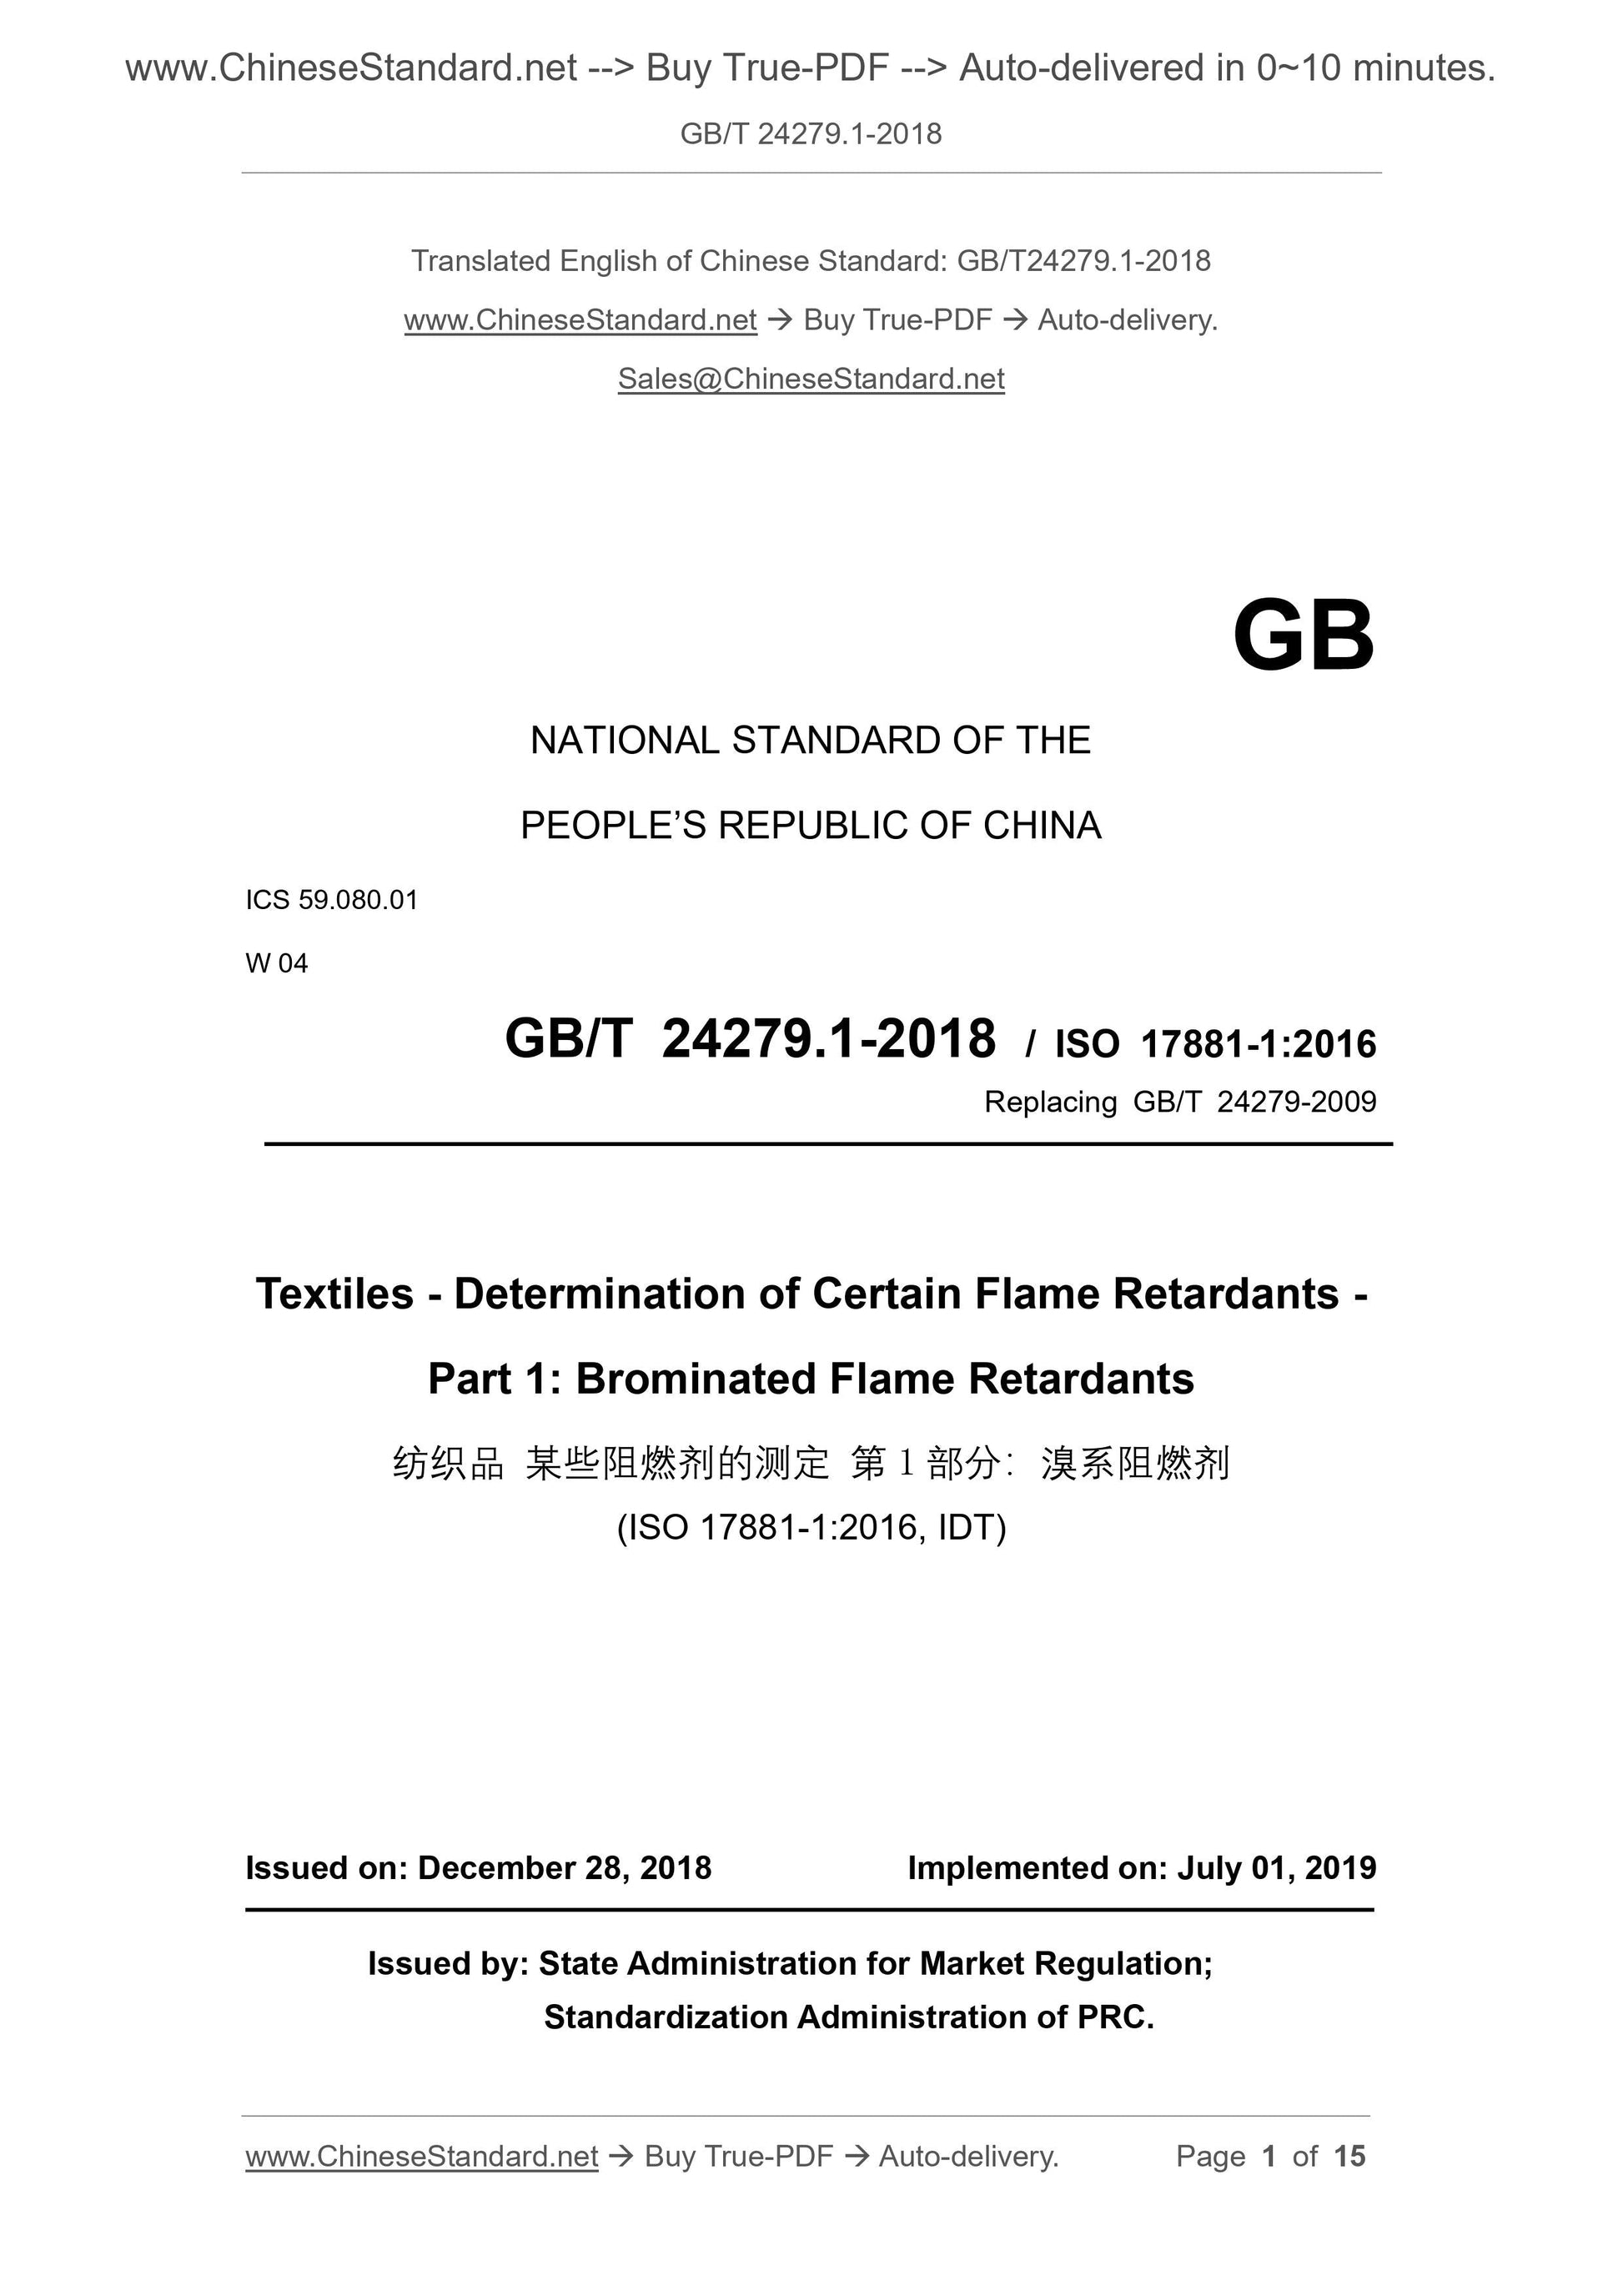 GB/T 24279.1-2018 Page 1